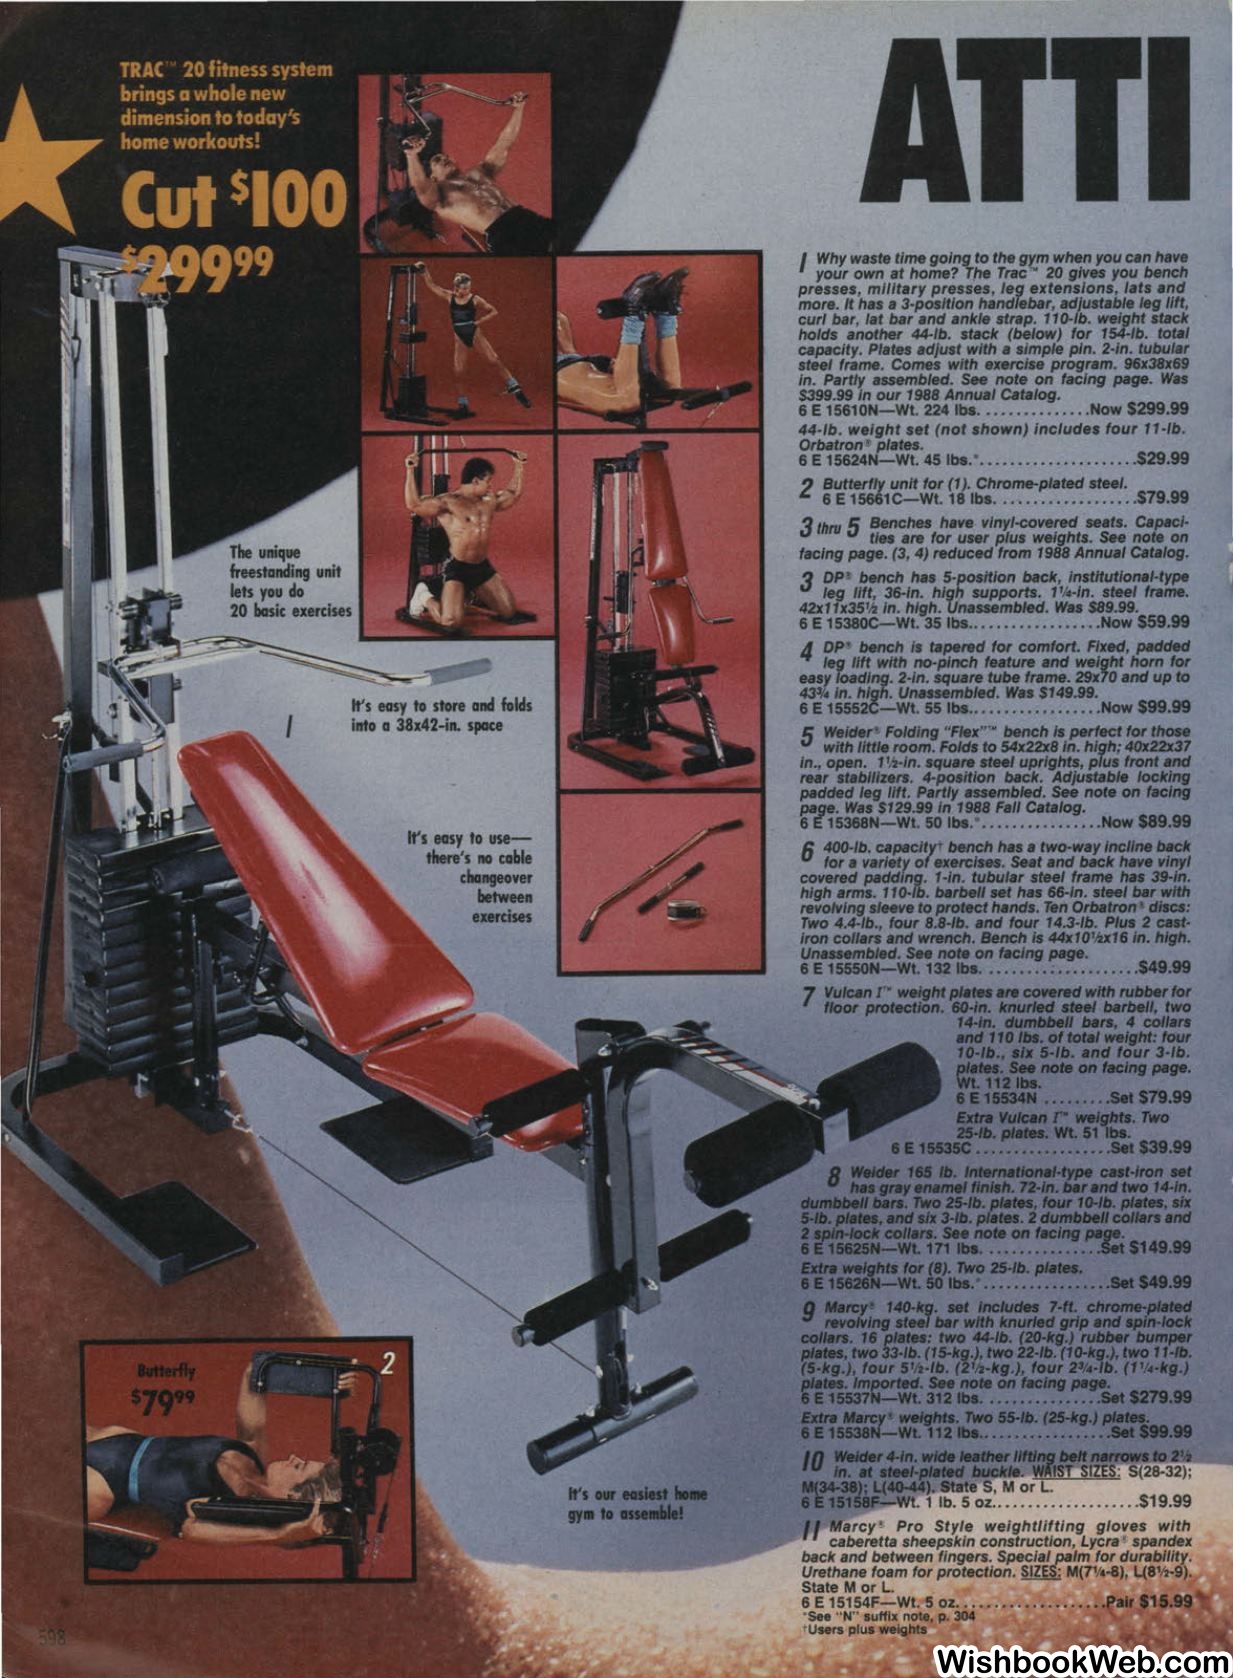 Dp gympac 1500 fitness system manual